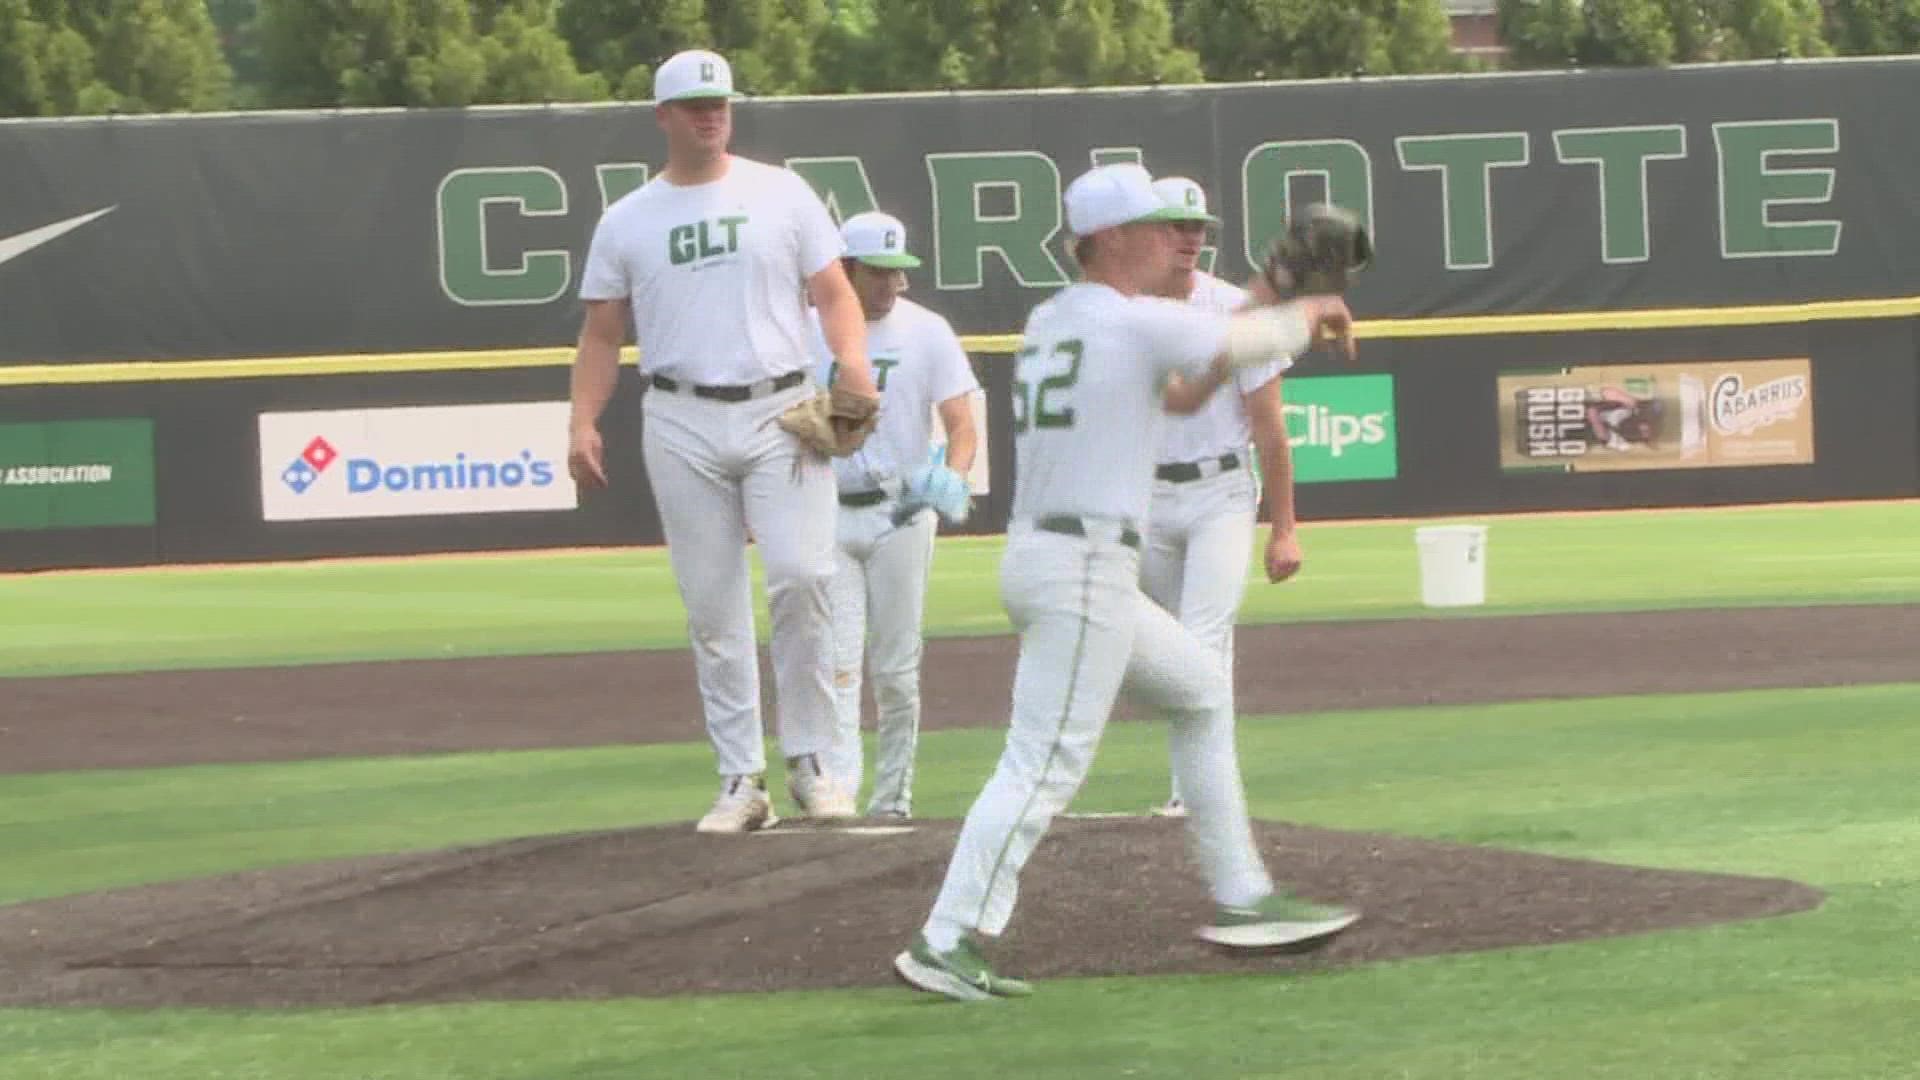 Email turns in to spot on team for Charlotte 49ers pitcher